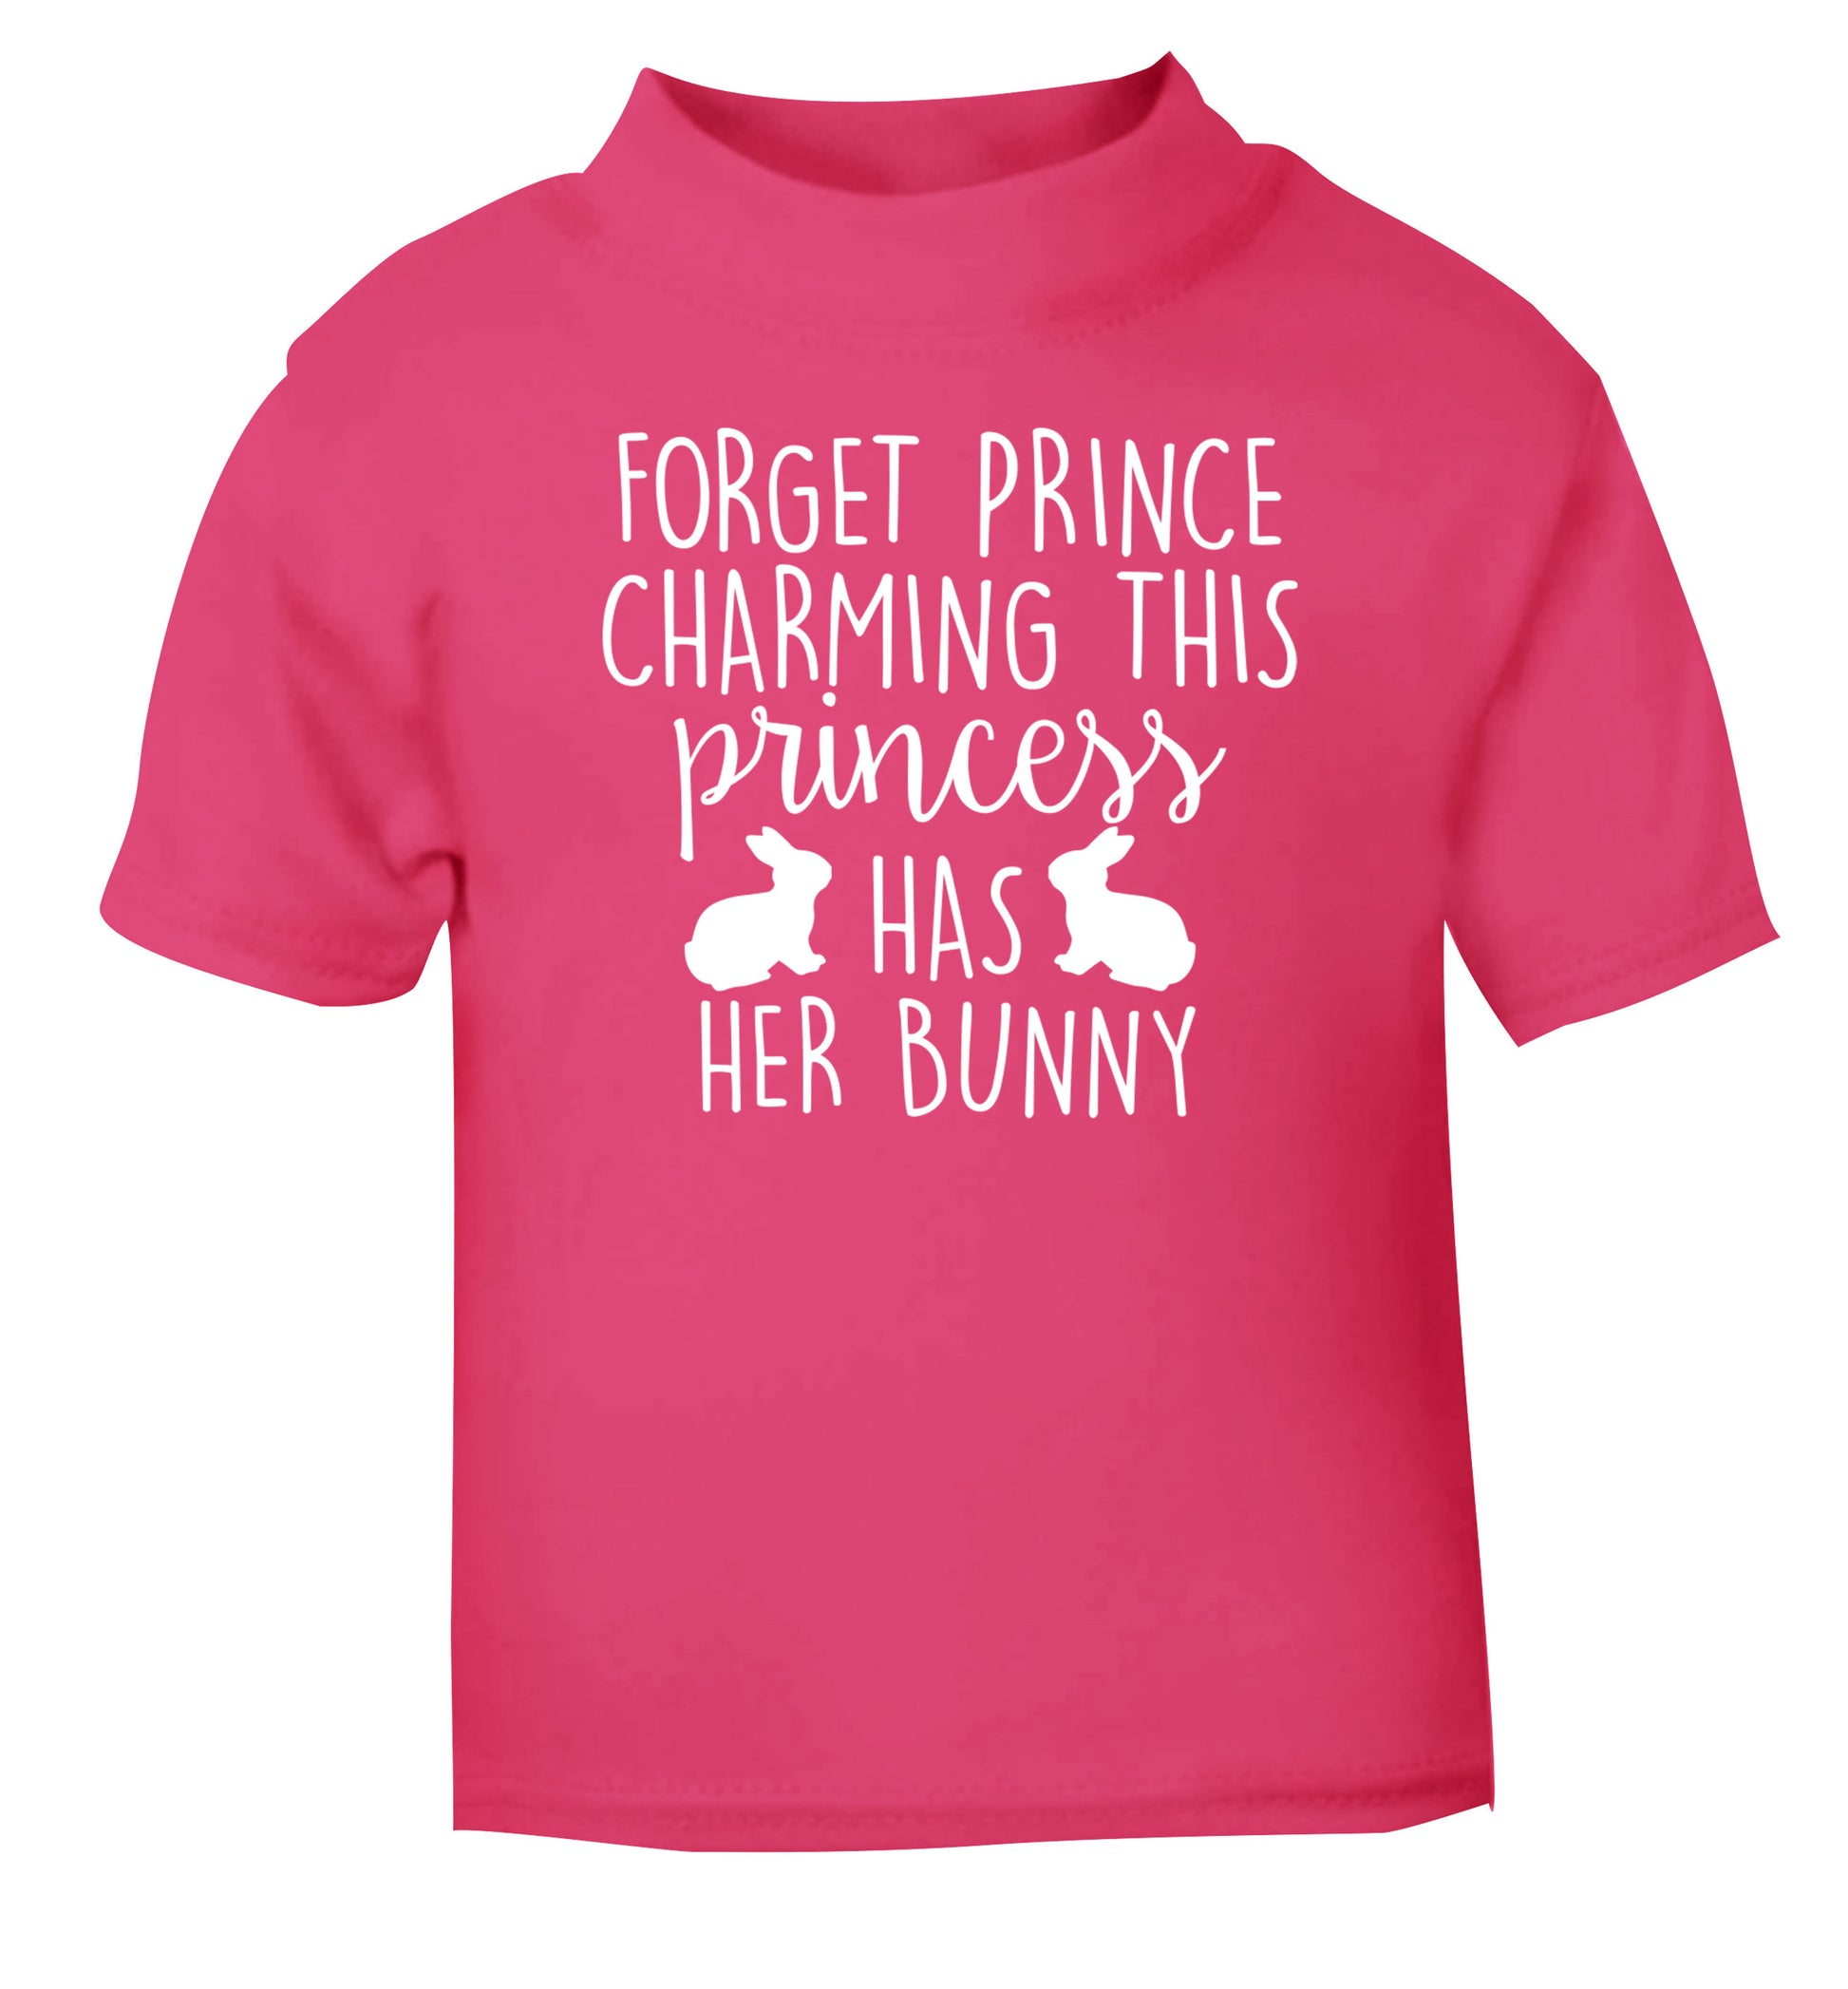 Forget prince charming this princess has her bunny pink Baby Toddler Tshirt 2 Years